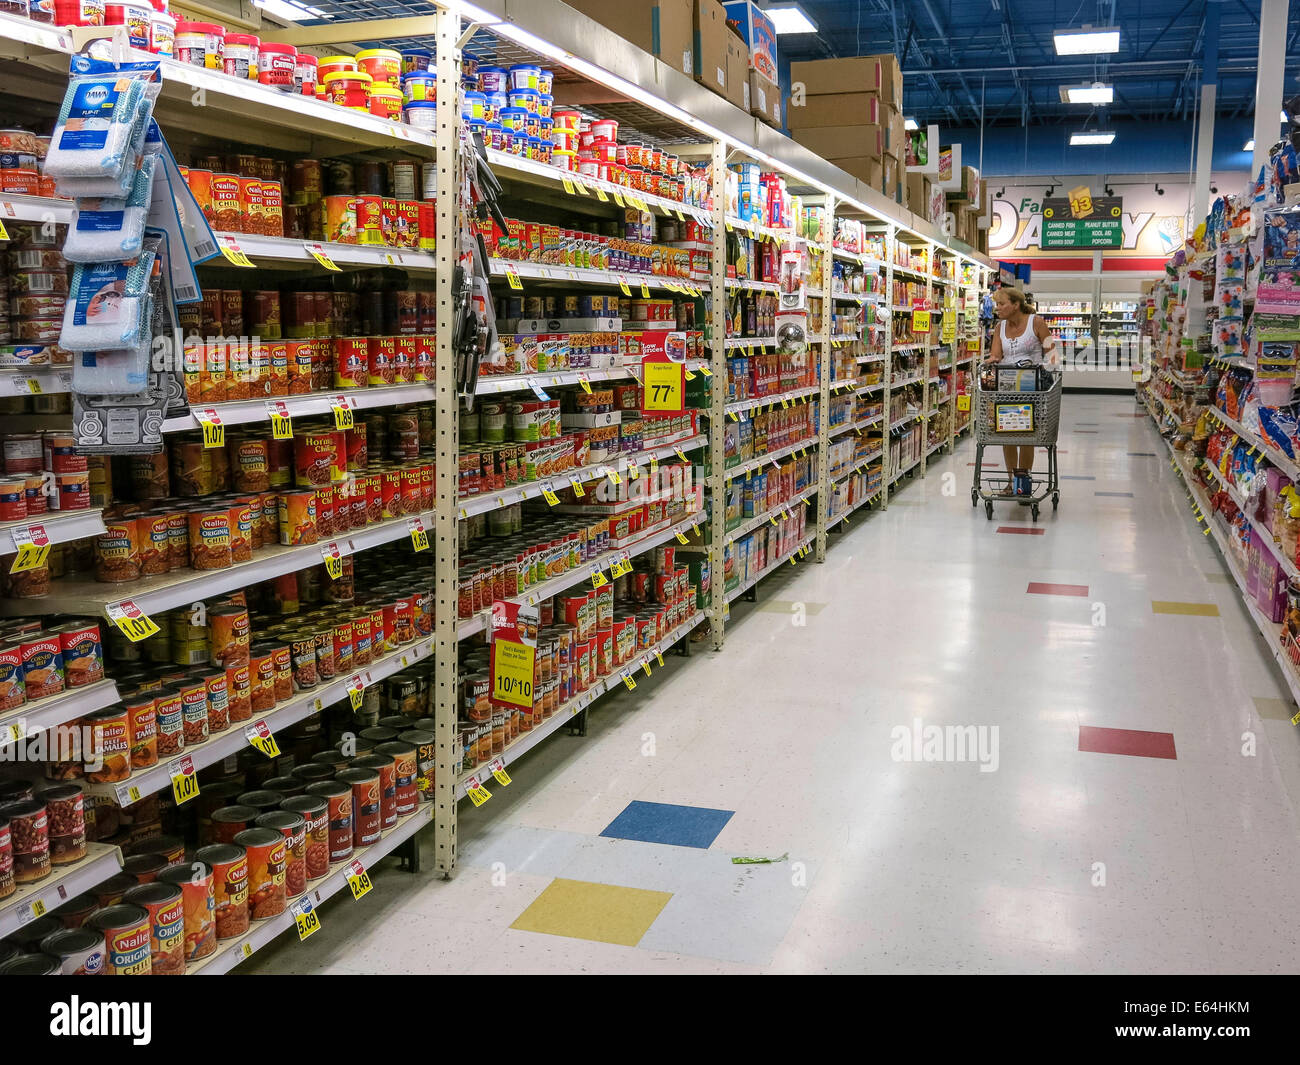 Shopper and Cart in Aisle, Smith's Grocery Store, Great Falls, Montana, USA Stock Photo